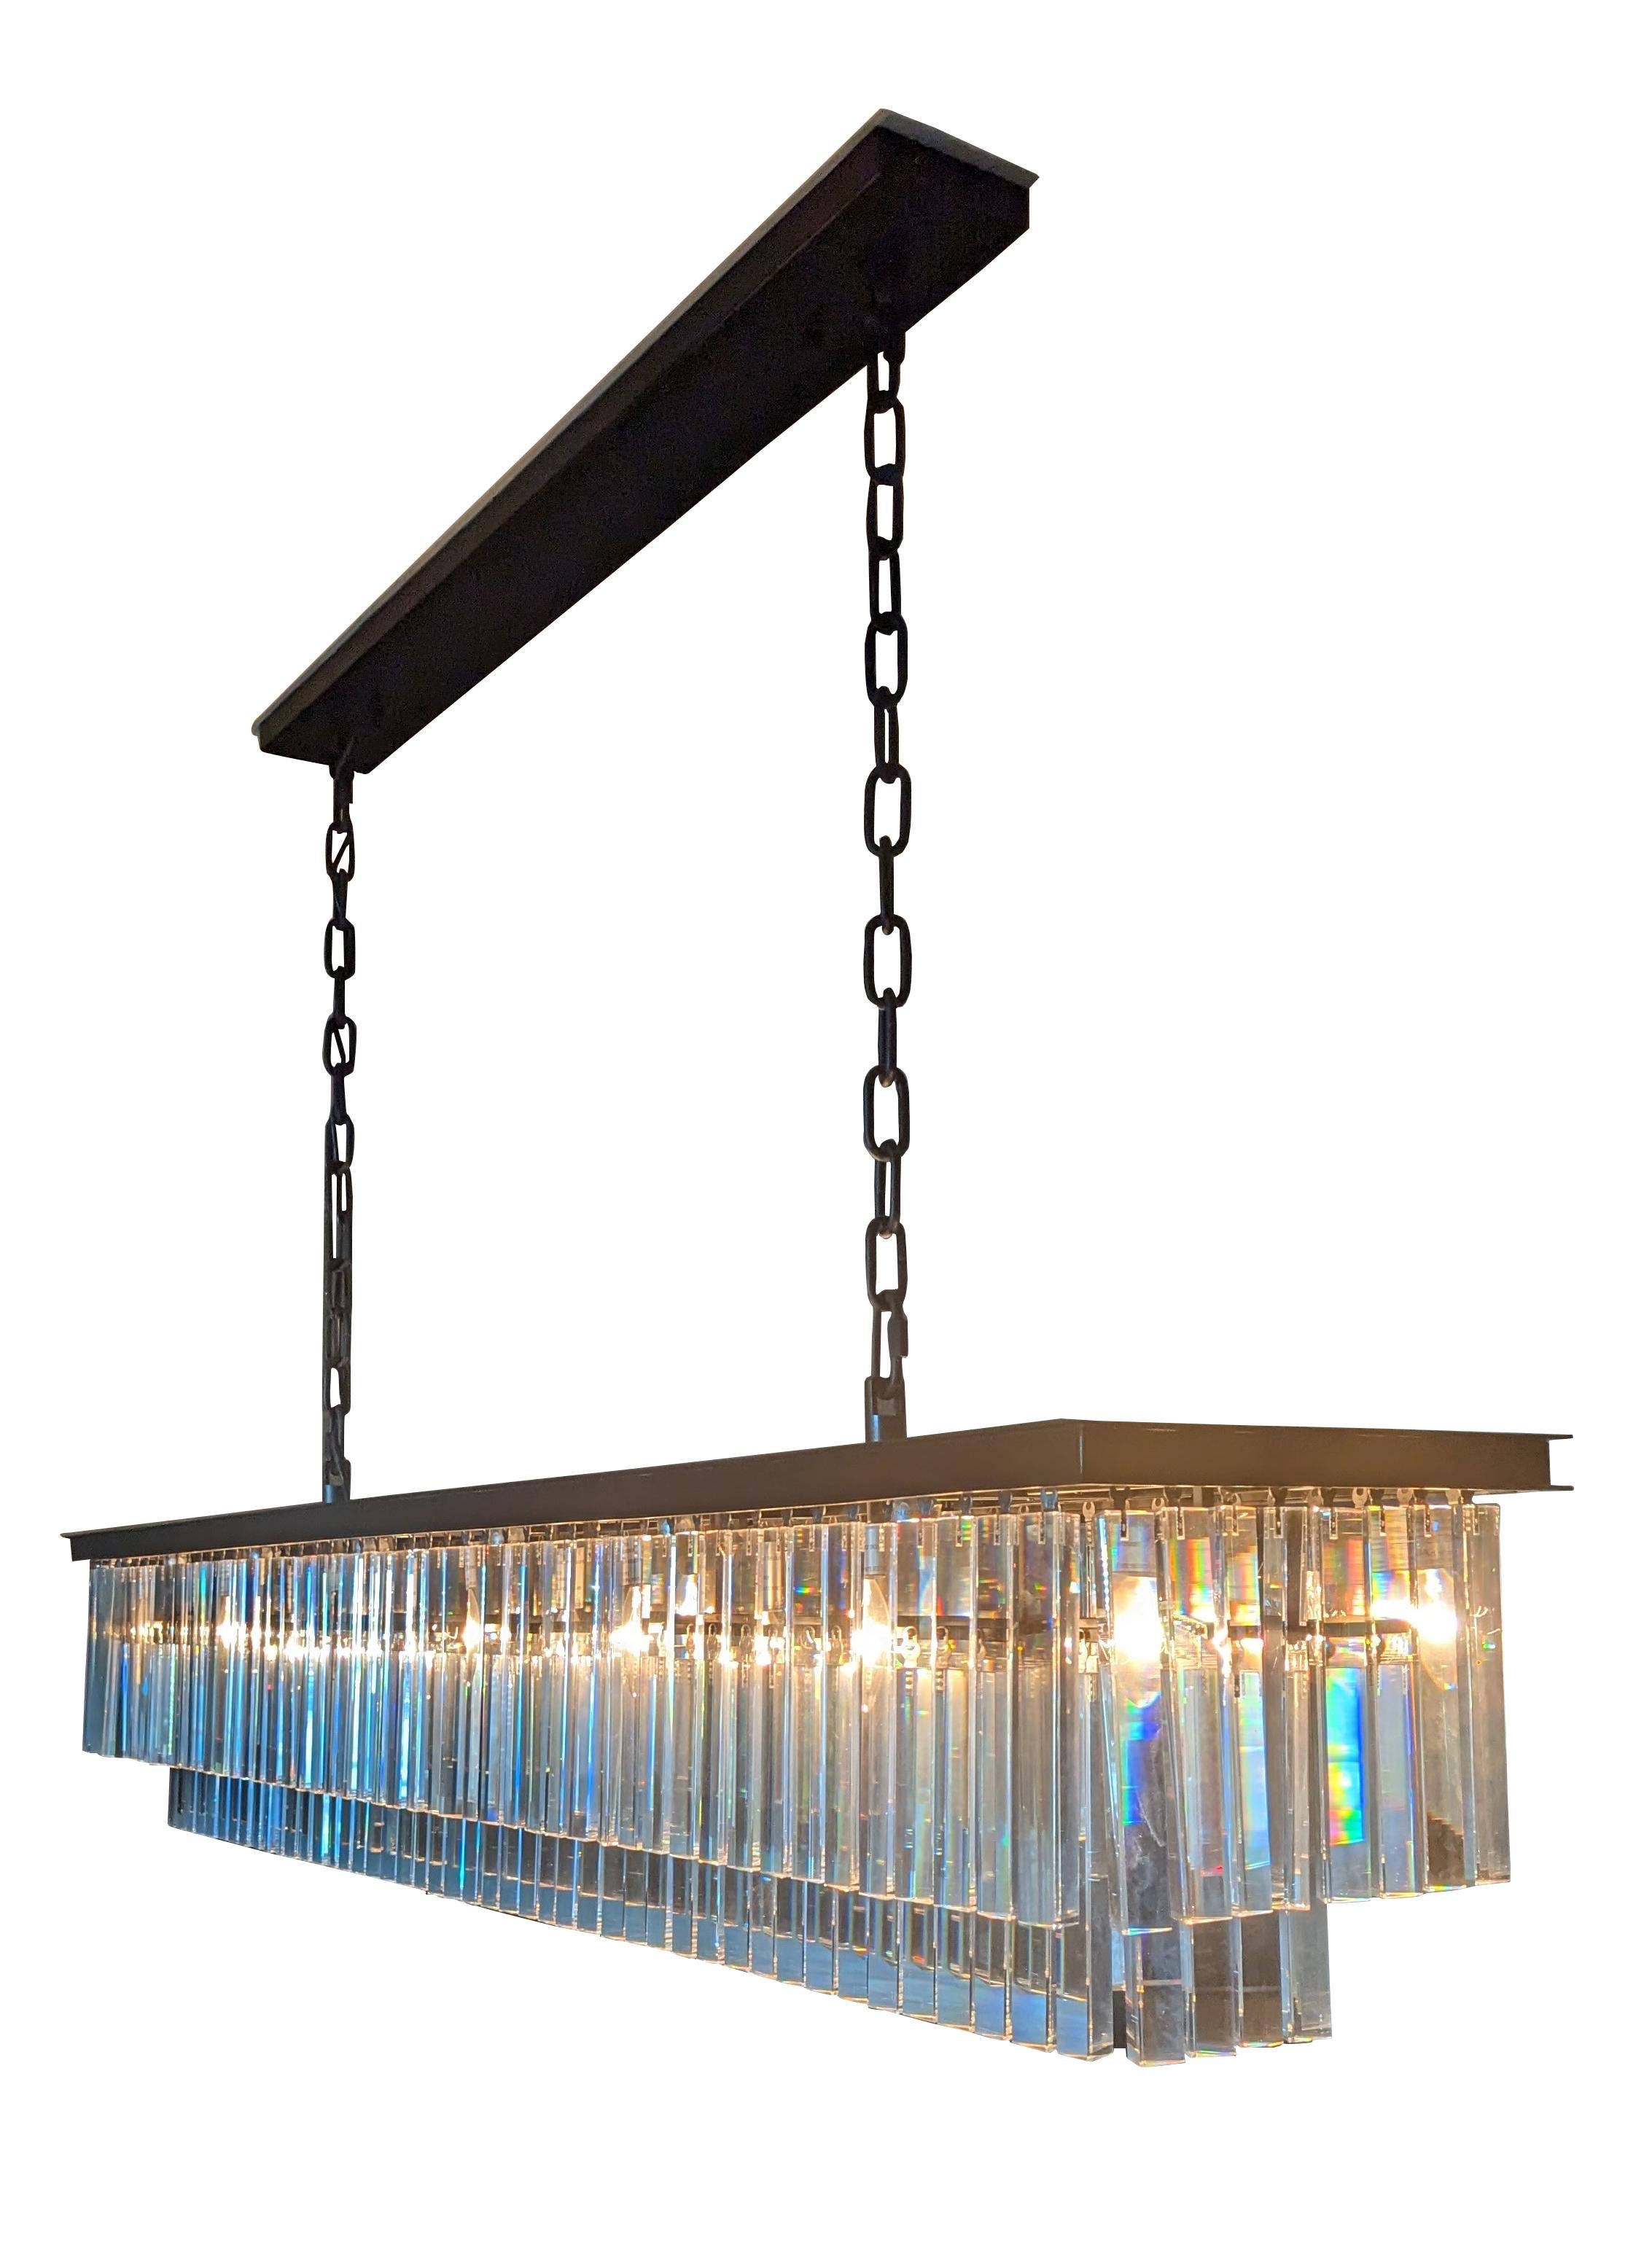 Vintage 1920S Odeon rectangular iron and crystal chandelier.

Inspired by the Art Deco style of 1920s Paris, our collection from Timothy Oulton captures the period's fascination with geometric forms. Masterfully refracting the light, hundreds of